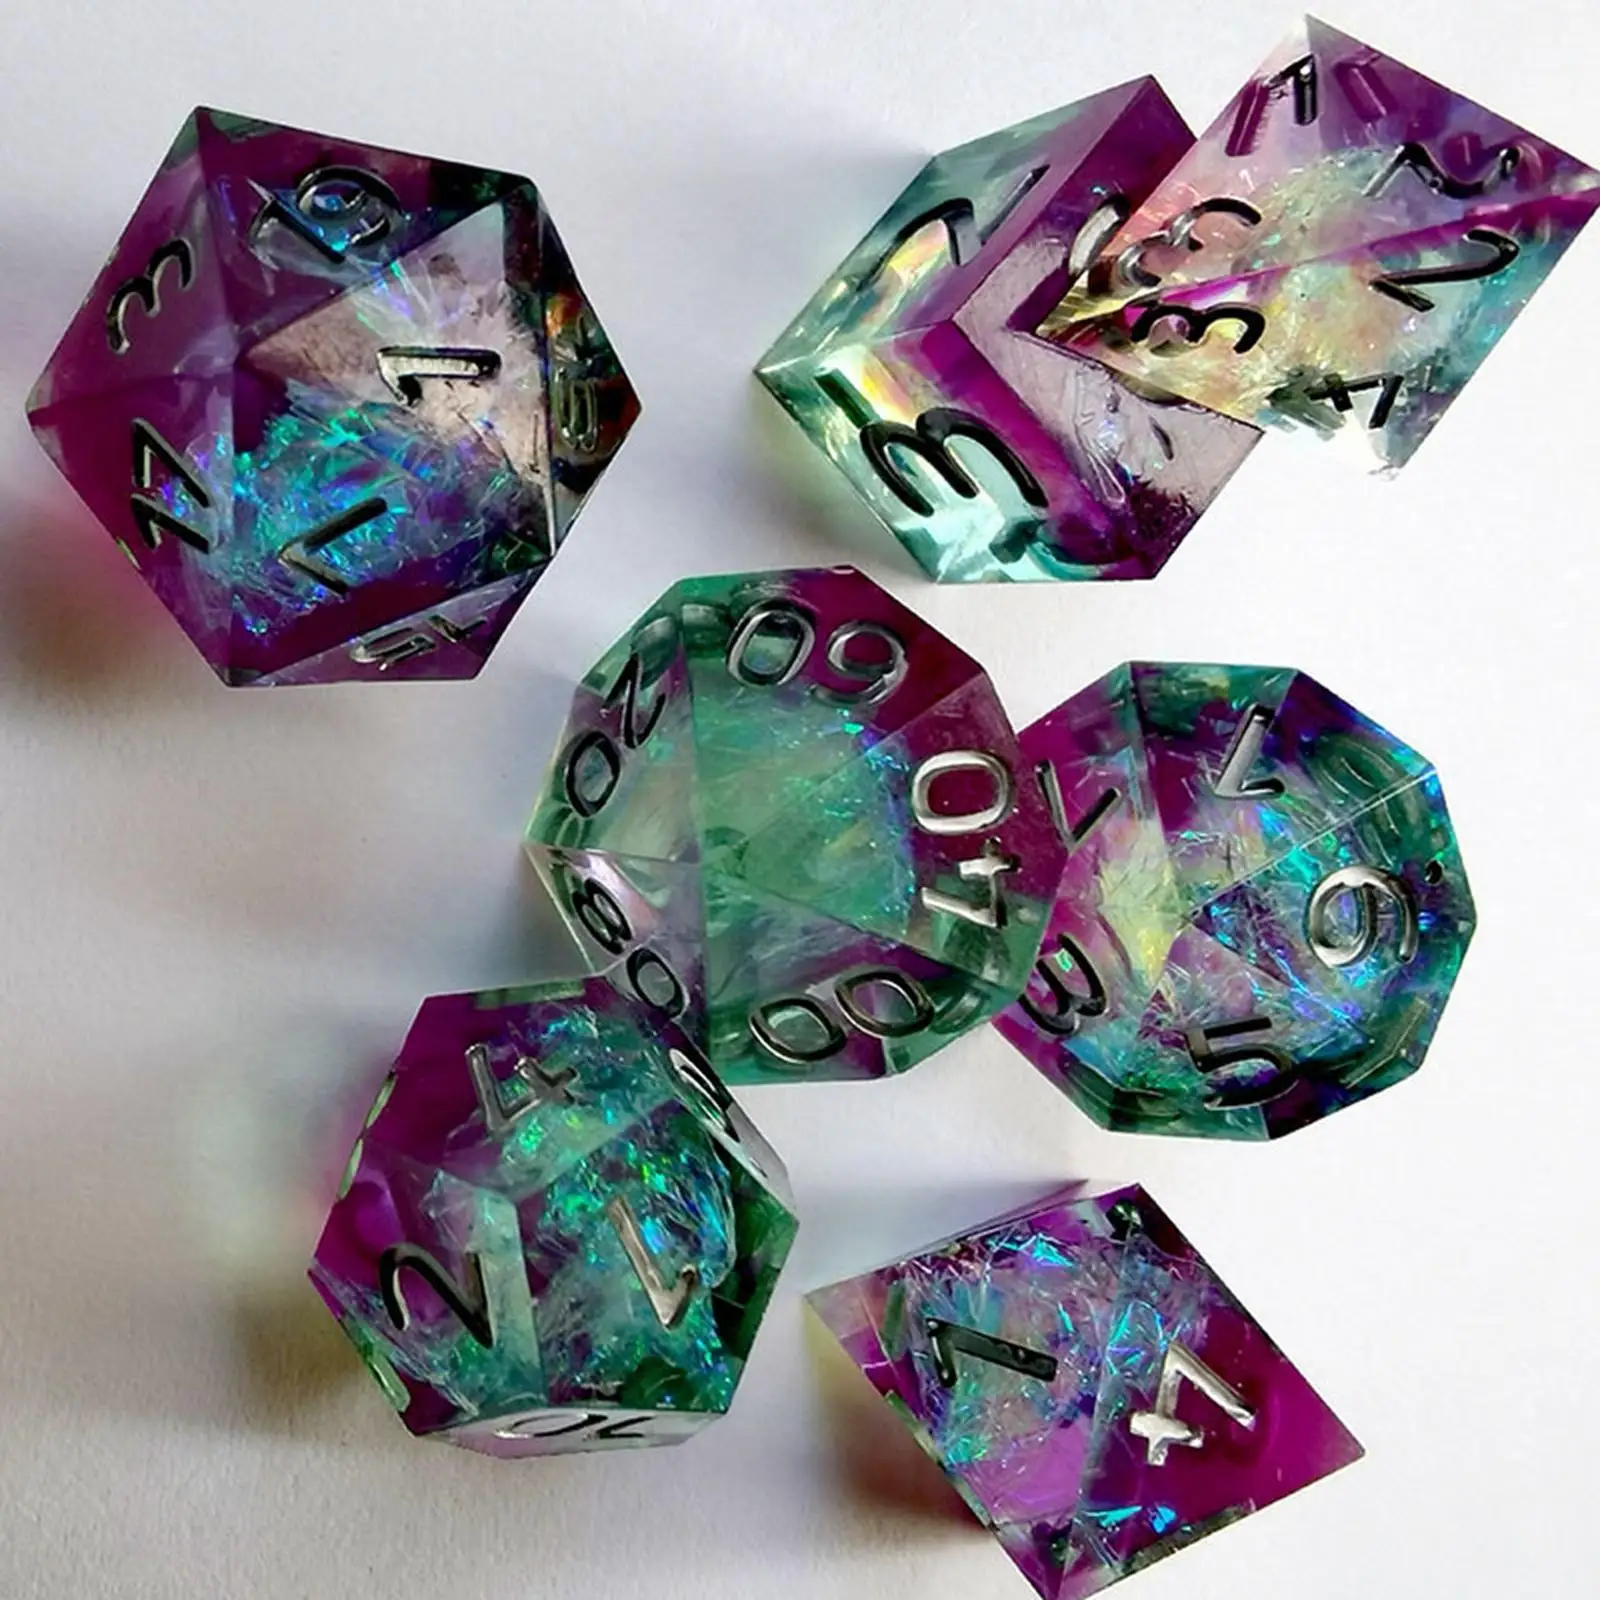 Polyhedral Dice D4 D6 D8 2XD10 D12 D20 Double-Colors Lightwheigt Handcrafted Designer for MTG